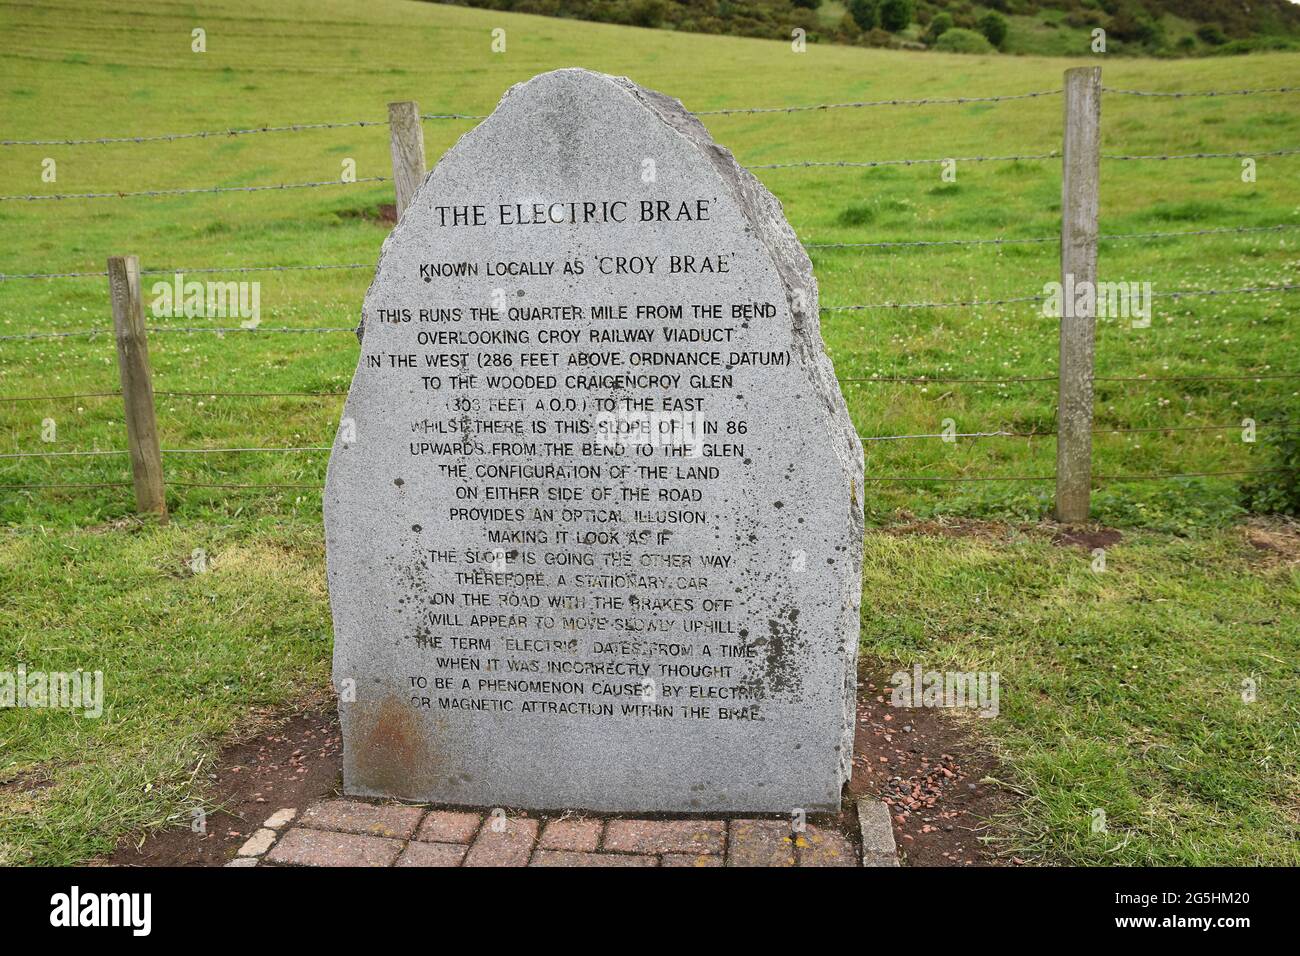 Ayrshire, Scotland, UK - June 26 2021: Old stone sign for The Electric Brae, a famous optical illusion. Stock Photo